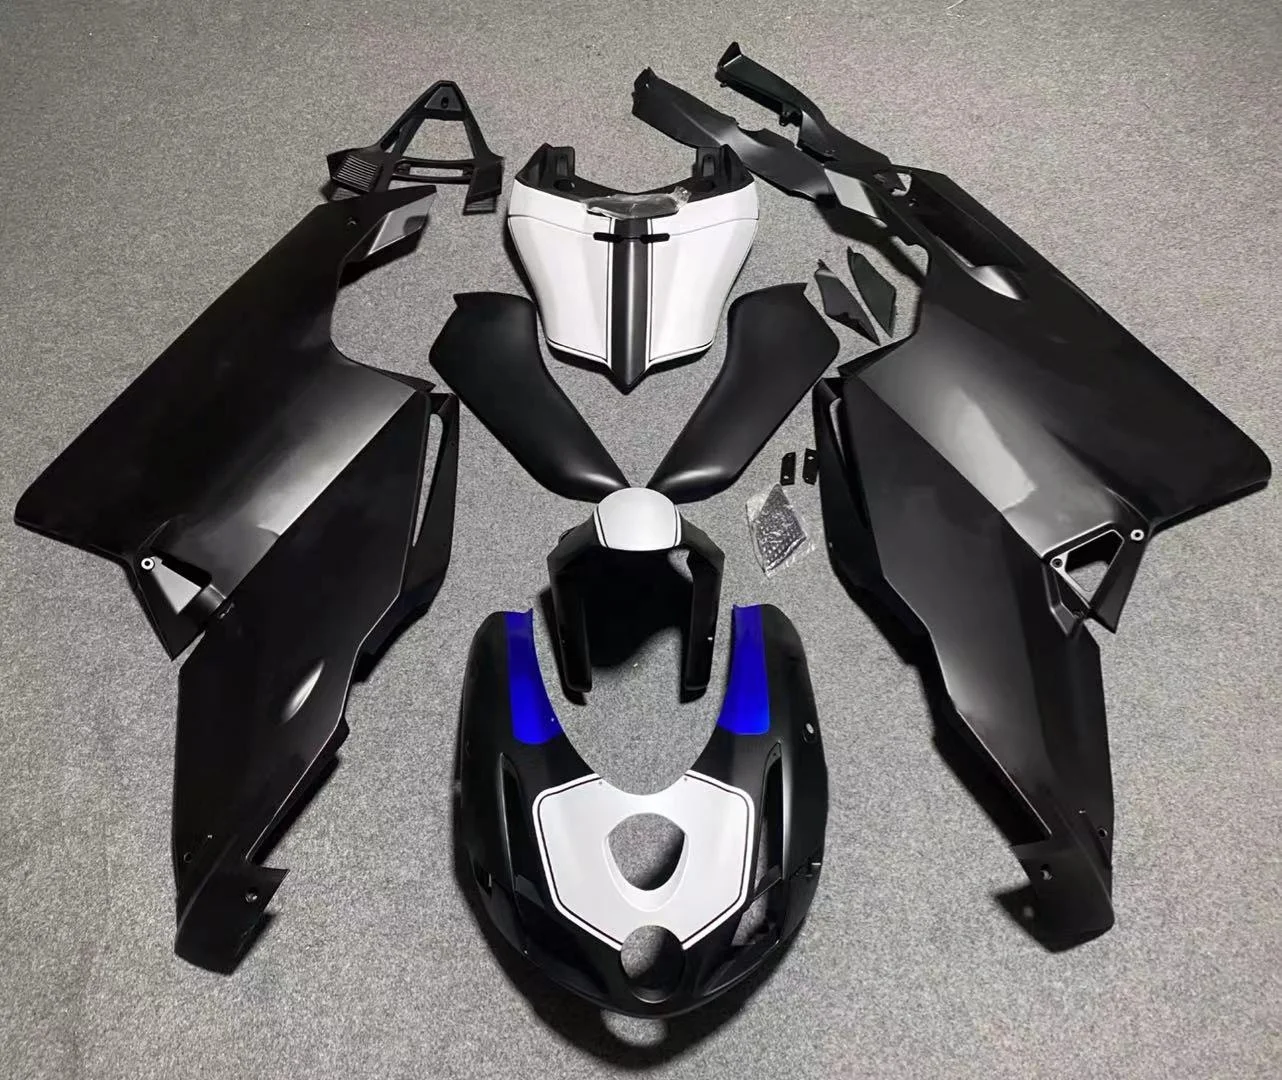 

2021 WHSC Black White Fairings For DUCATI 749 2003-2004 ABS Plastic Motorcycle Fairing Kit, Pictures shown